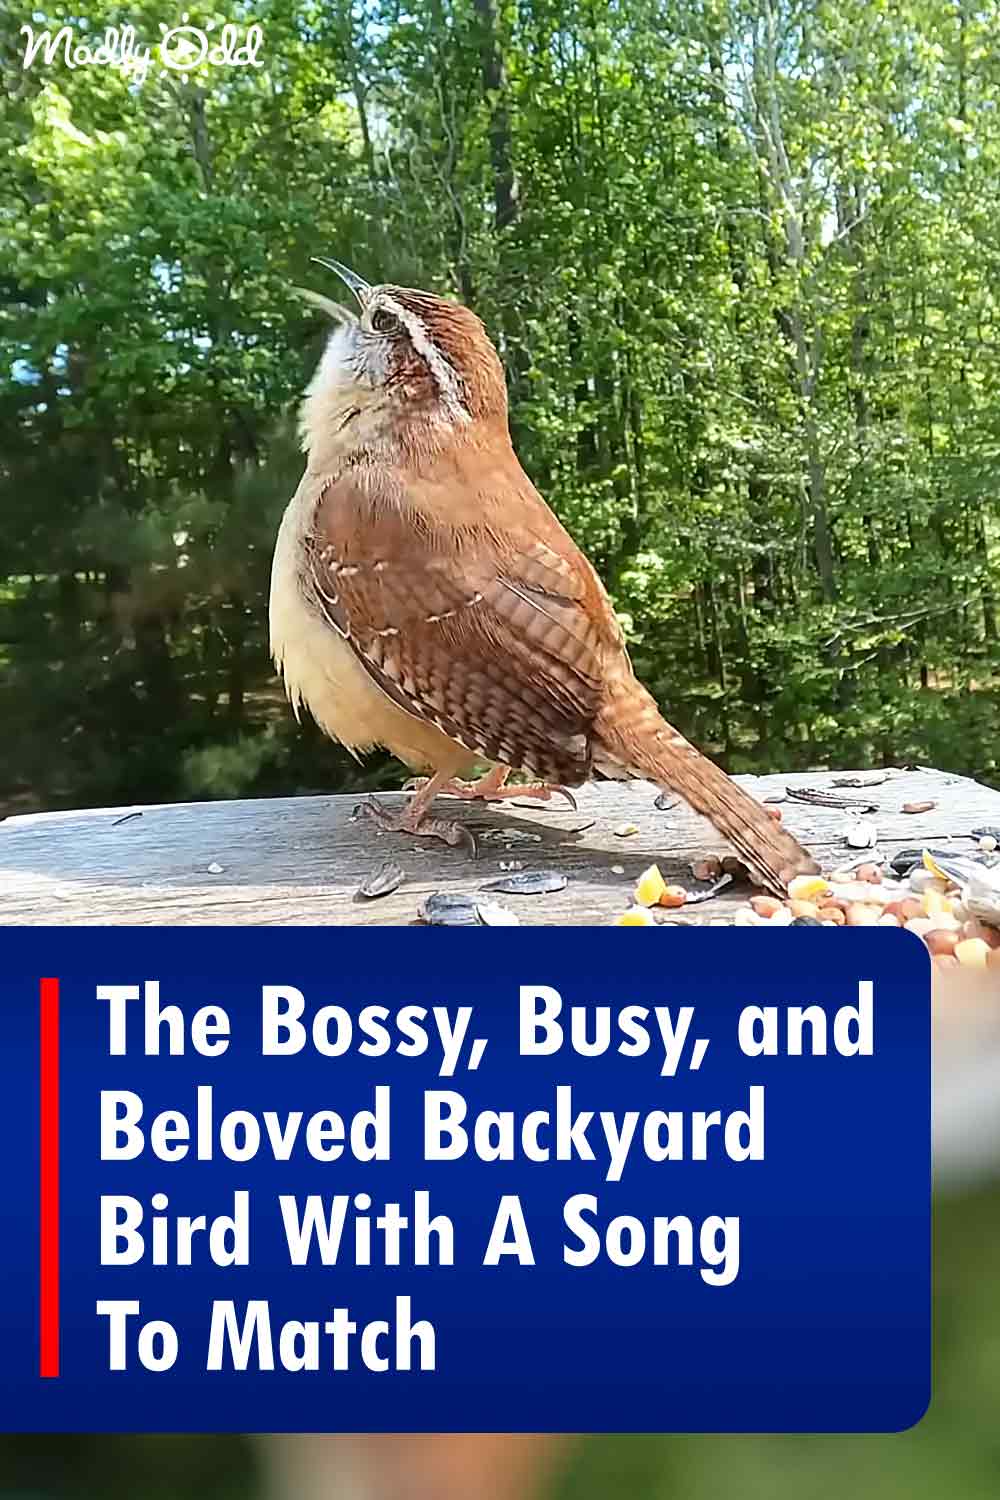 The Bossy, Busy, and Beloved Backyard Bird With A Song To Match